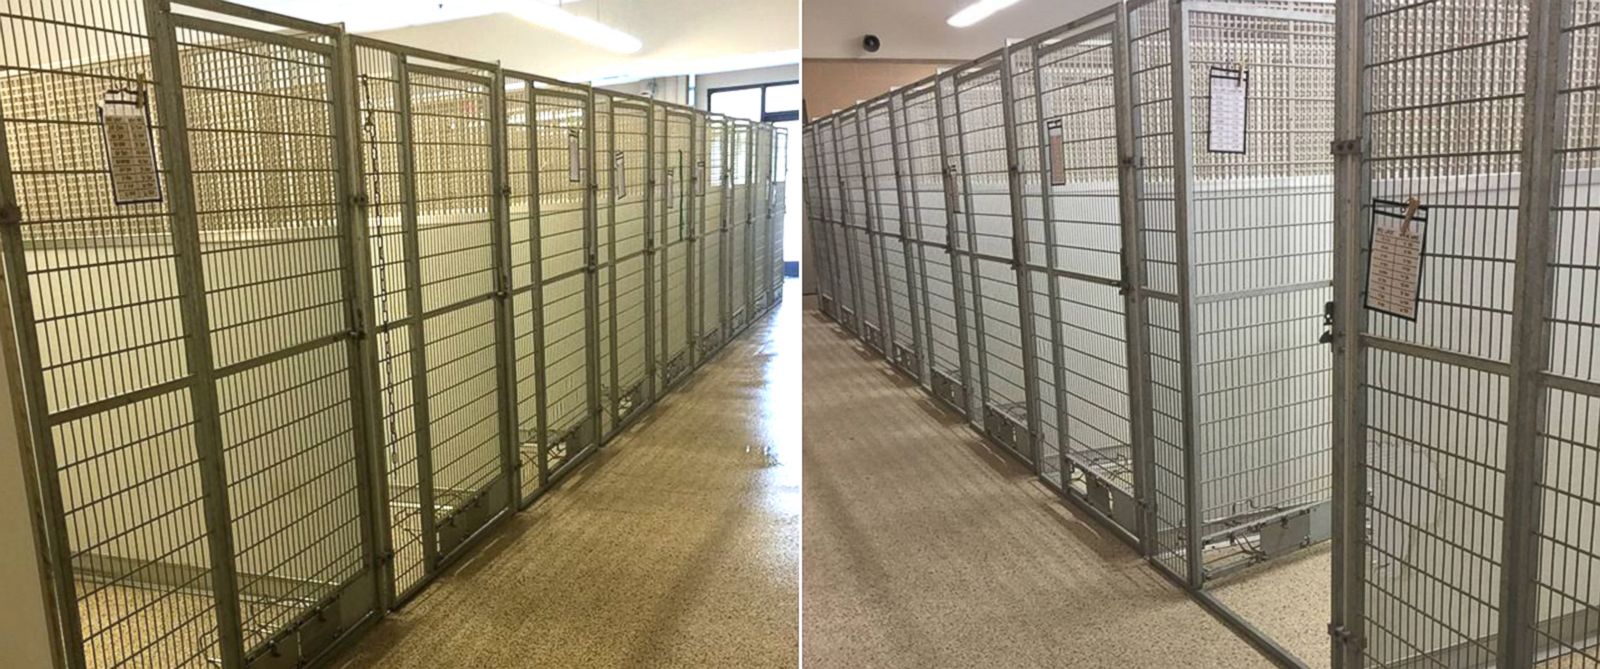 Animal Shelter Finds Homes for Every Cat and Dog in Its Facility